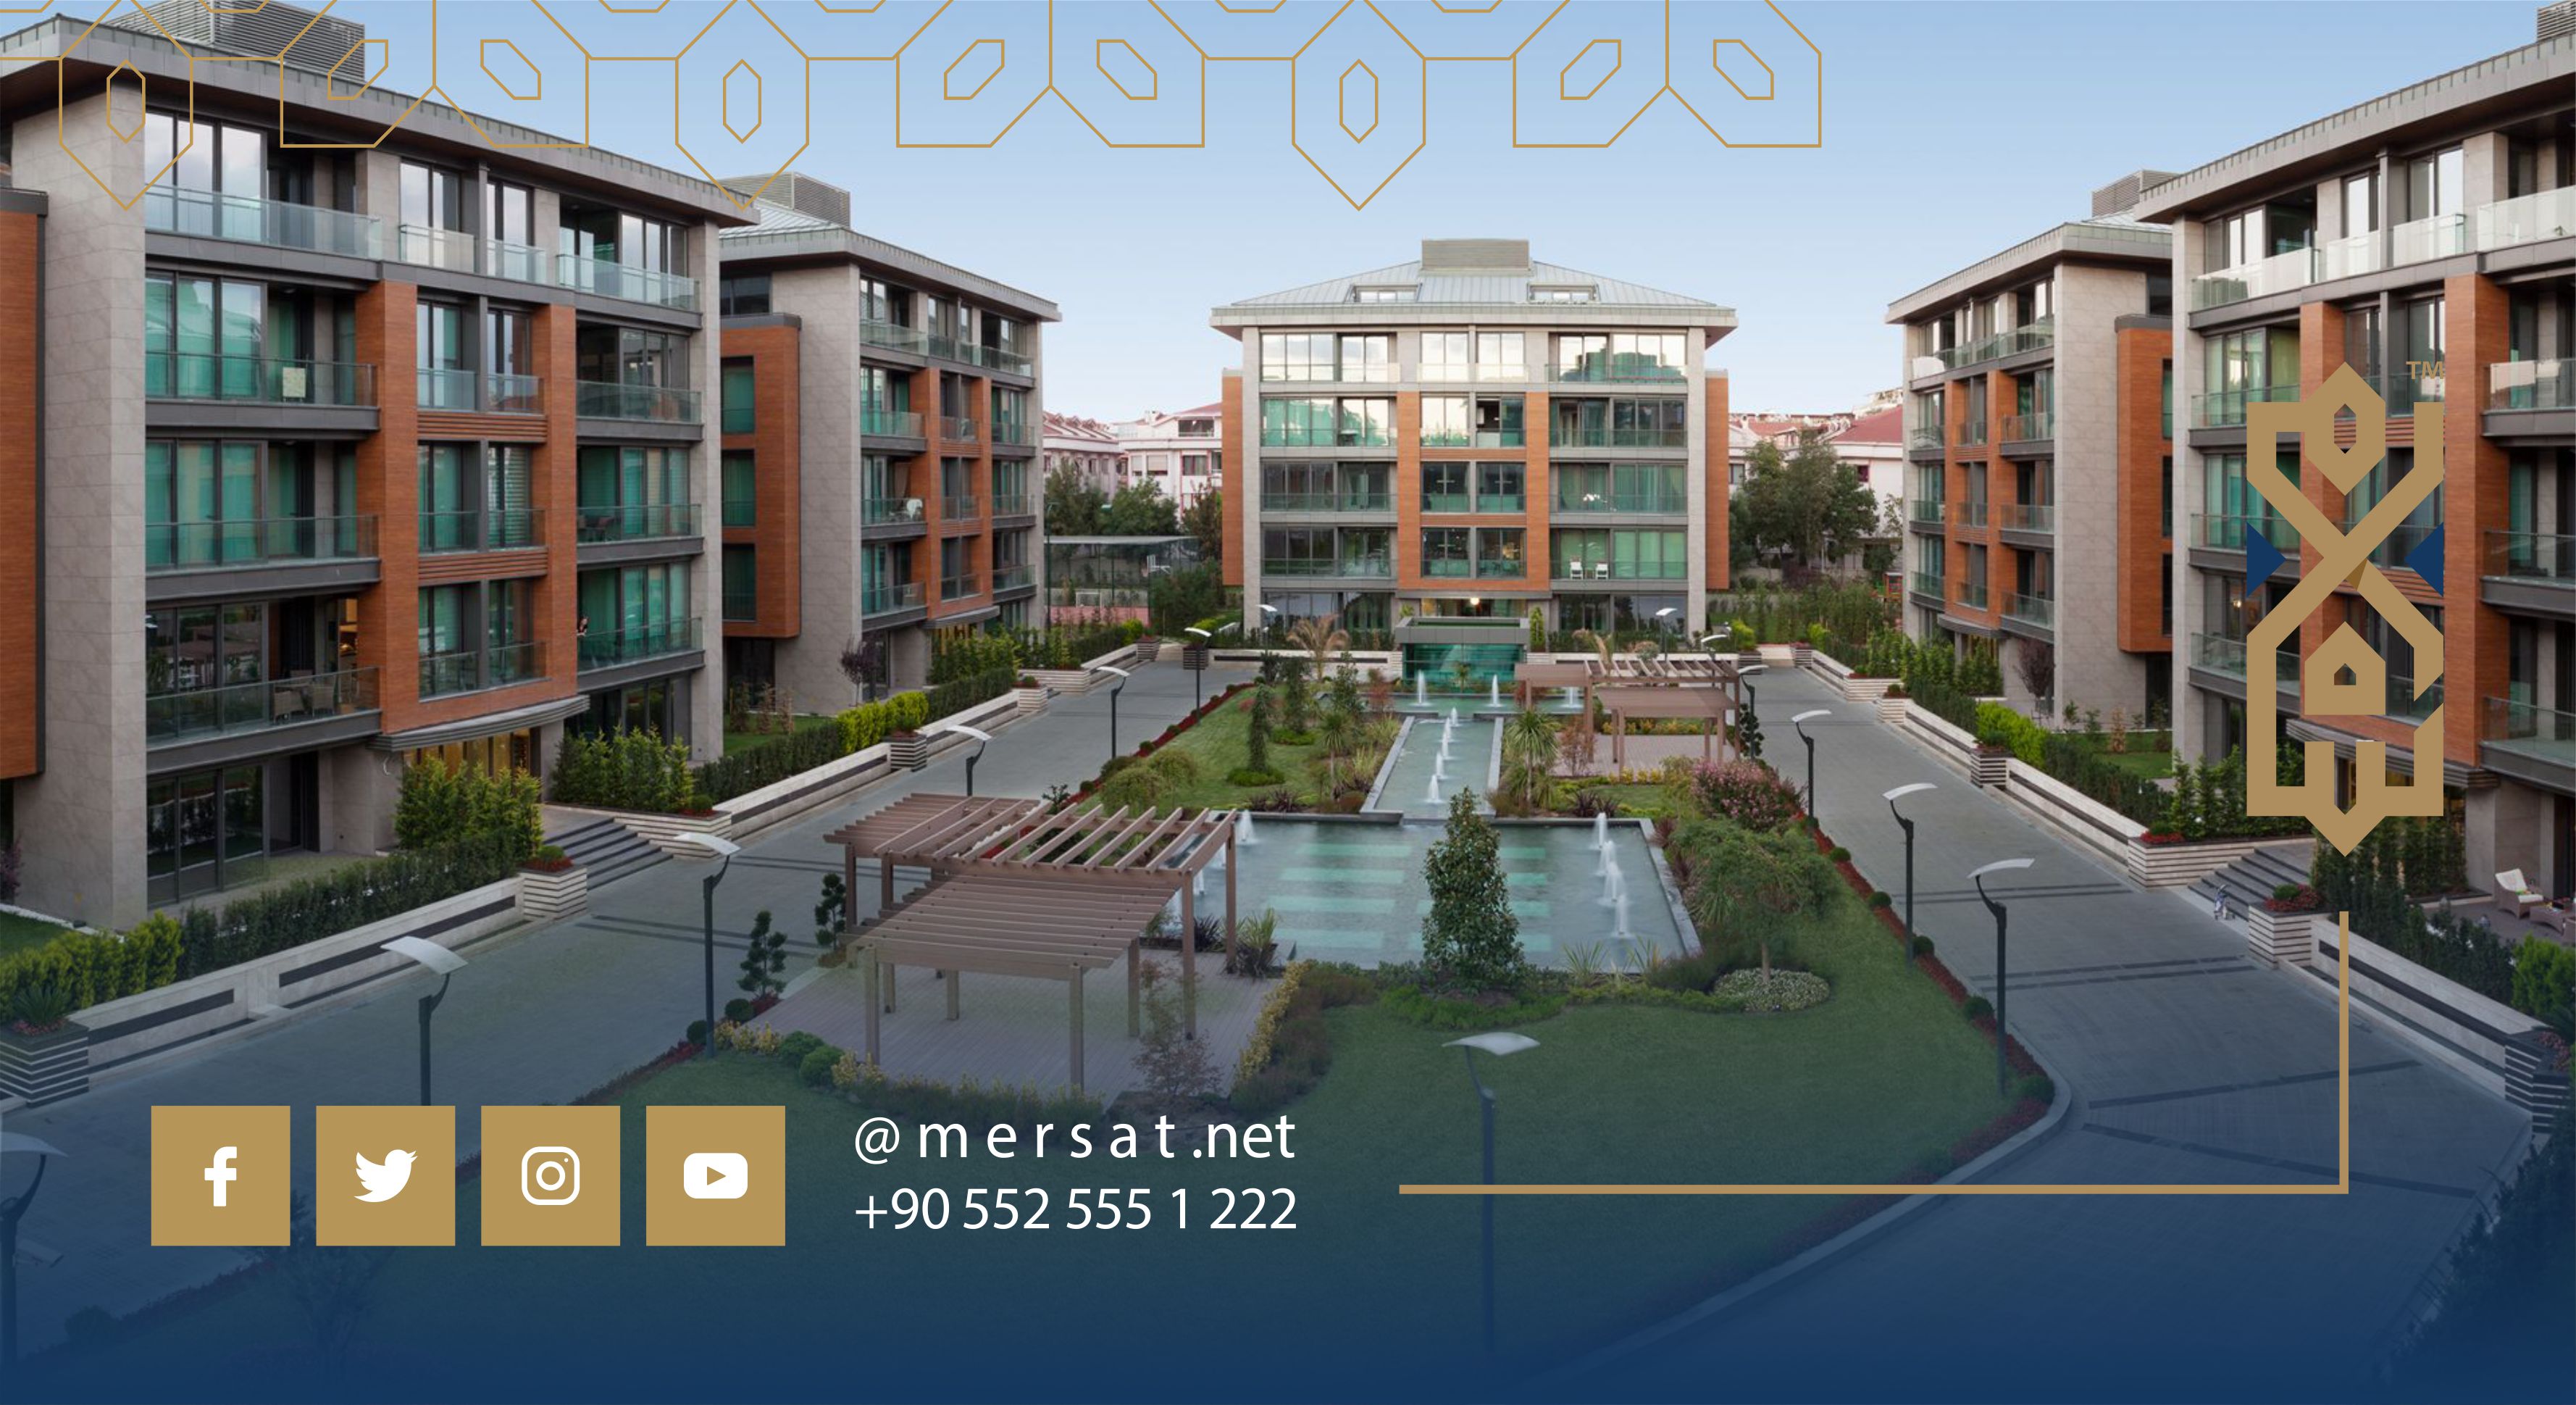 Florya is a suitable option for buying apartments in Istanbul